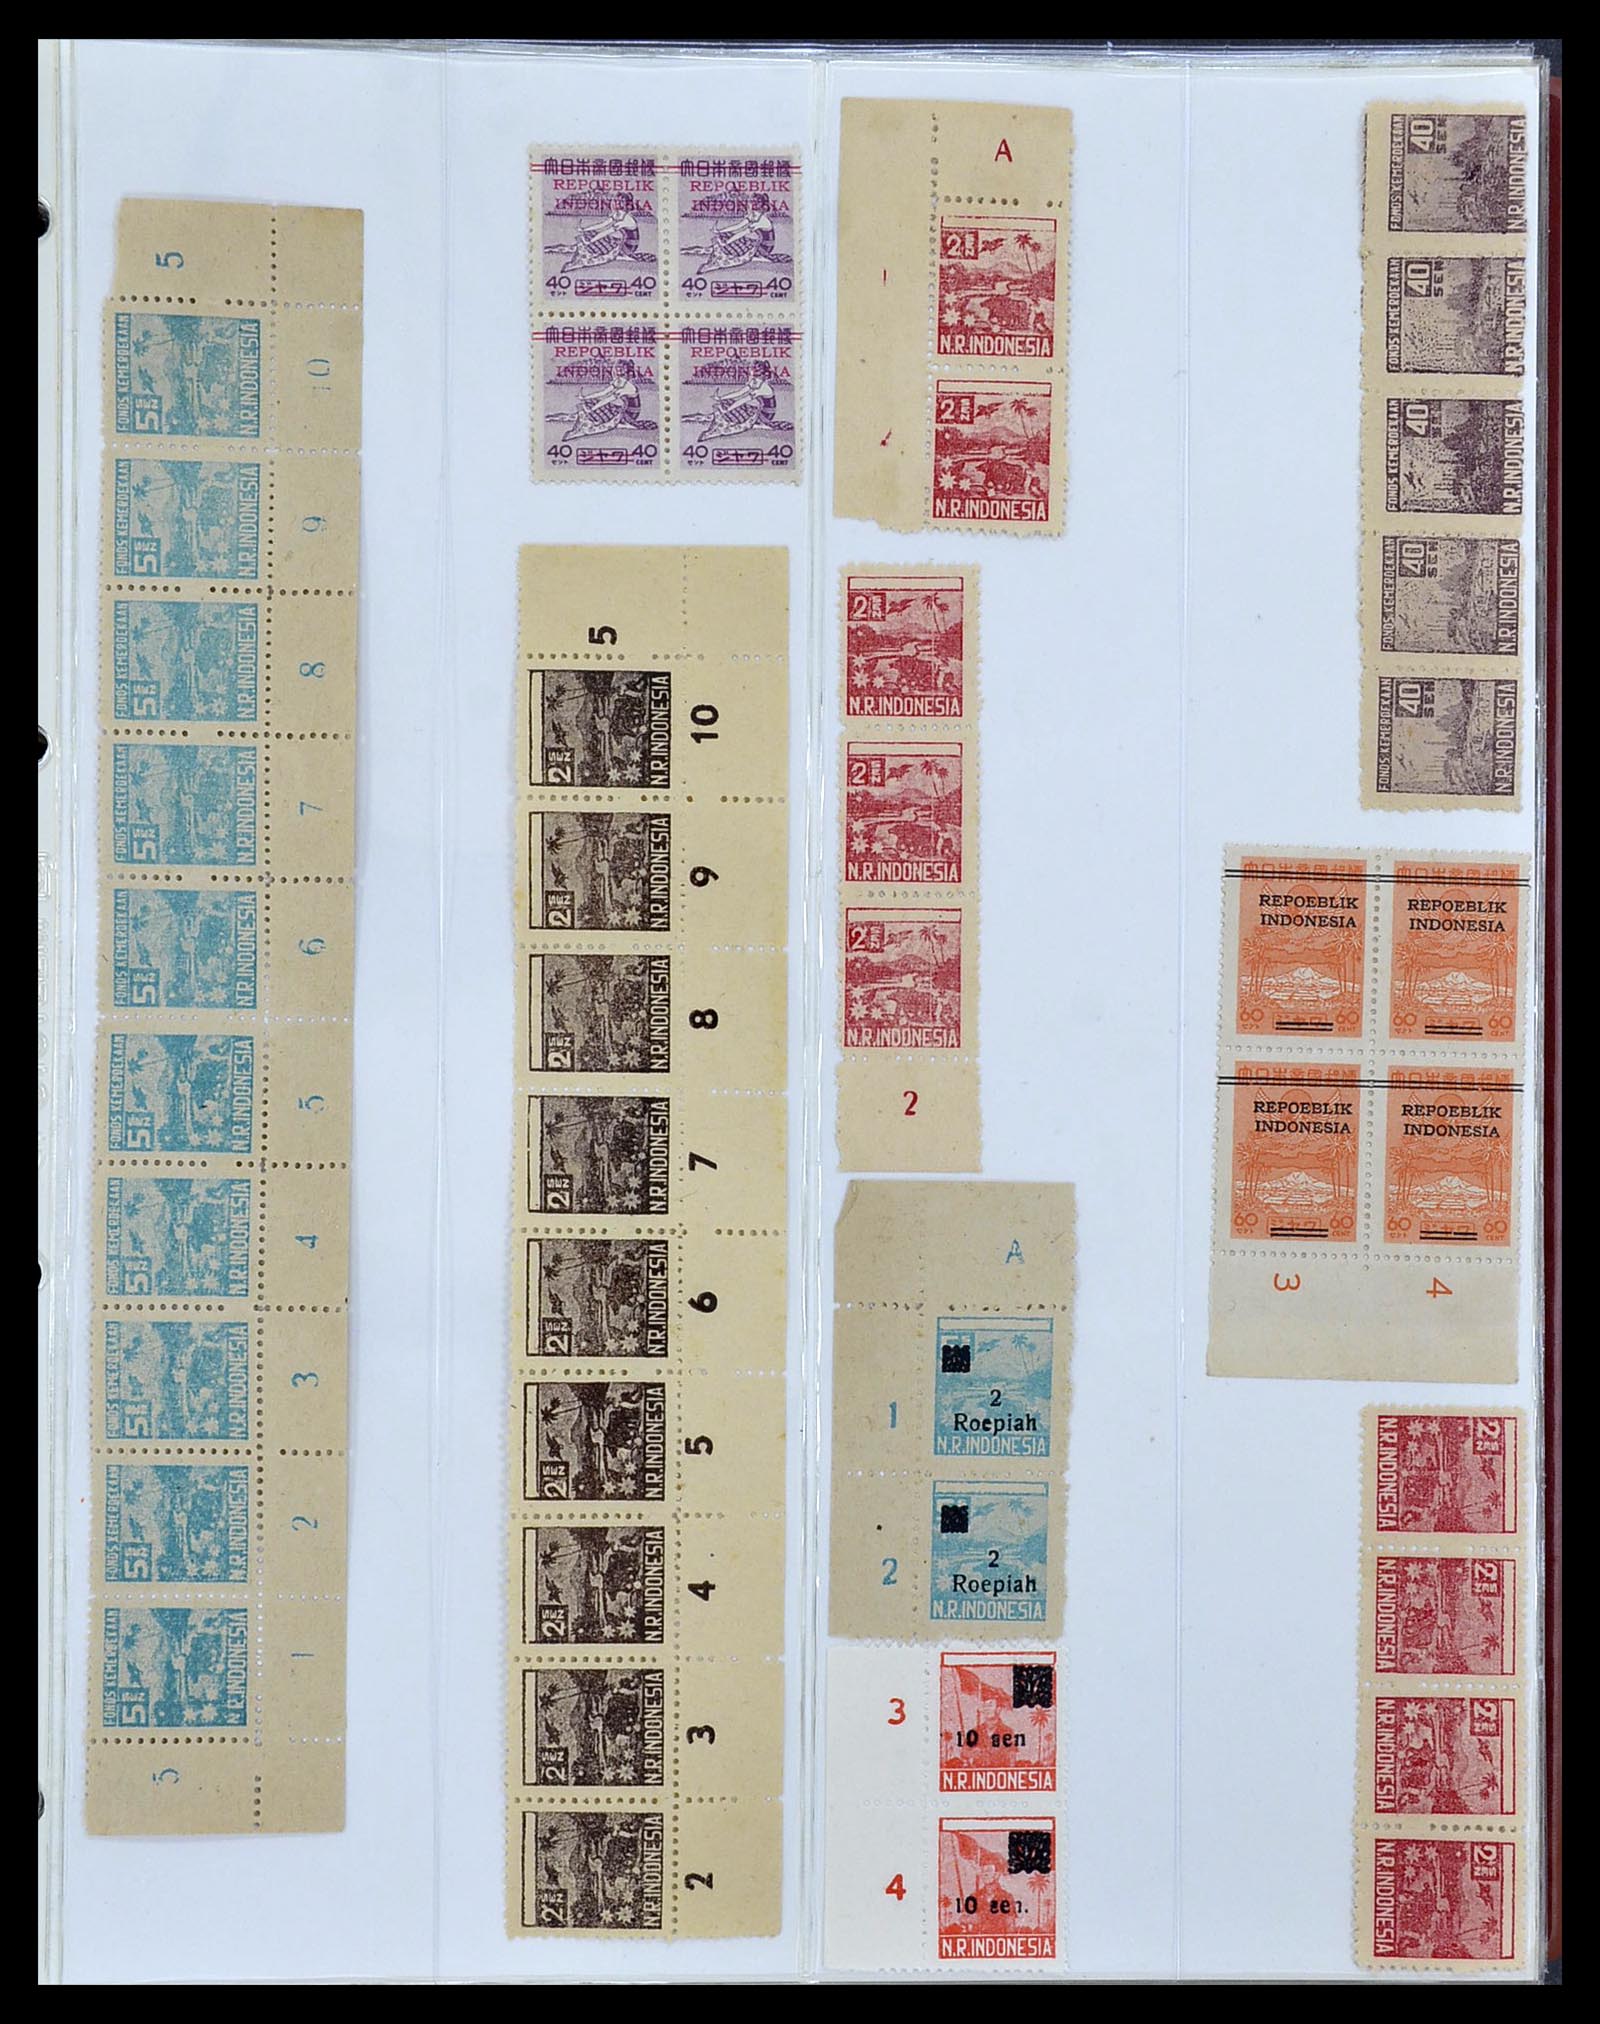 34545 062 - Stamp Collection 34545 Japanese Occupation of the Dutch East Indies and 